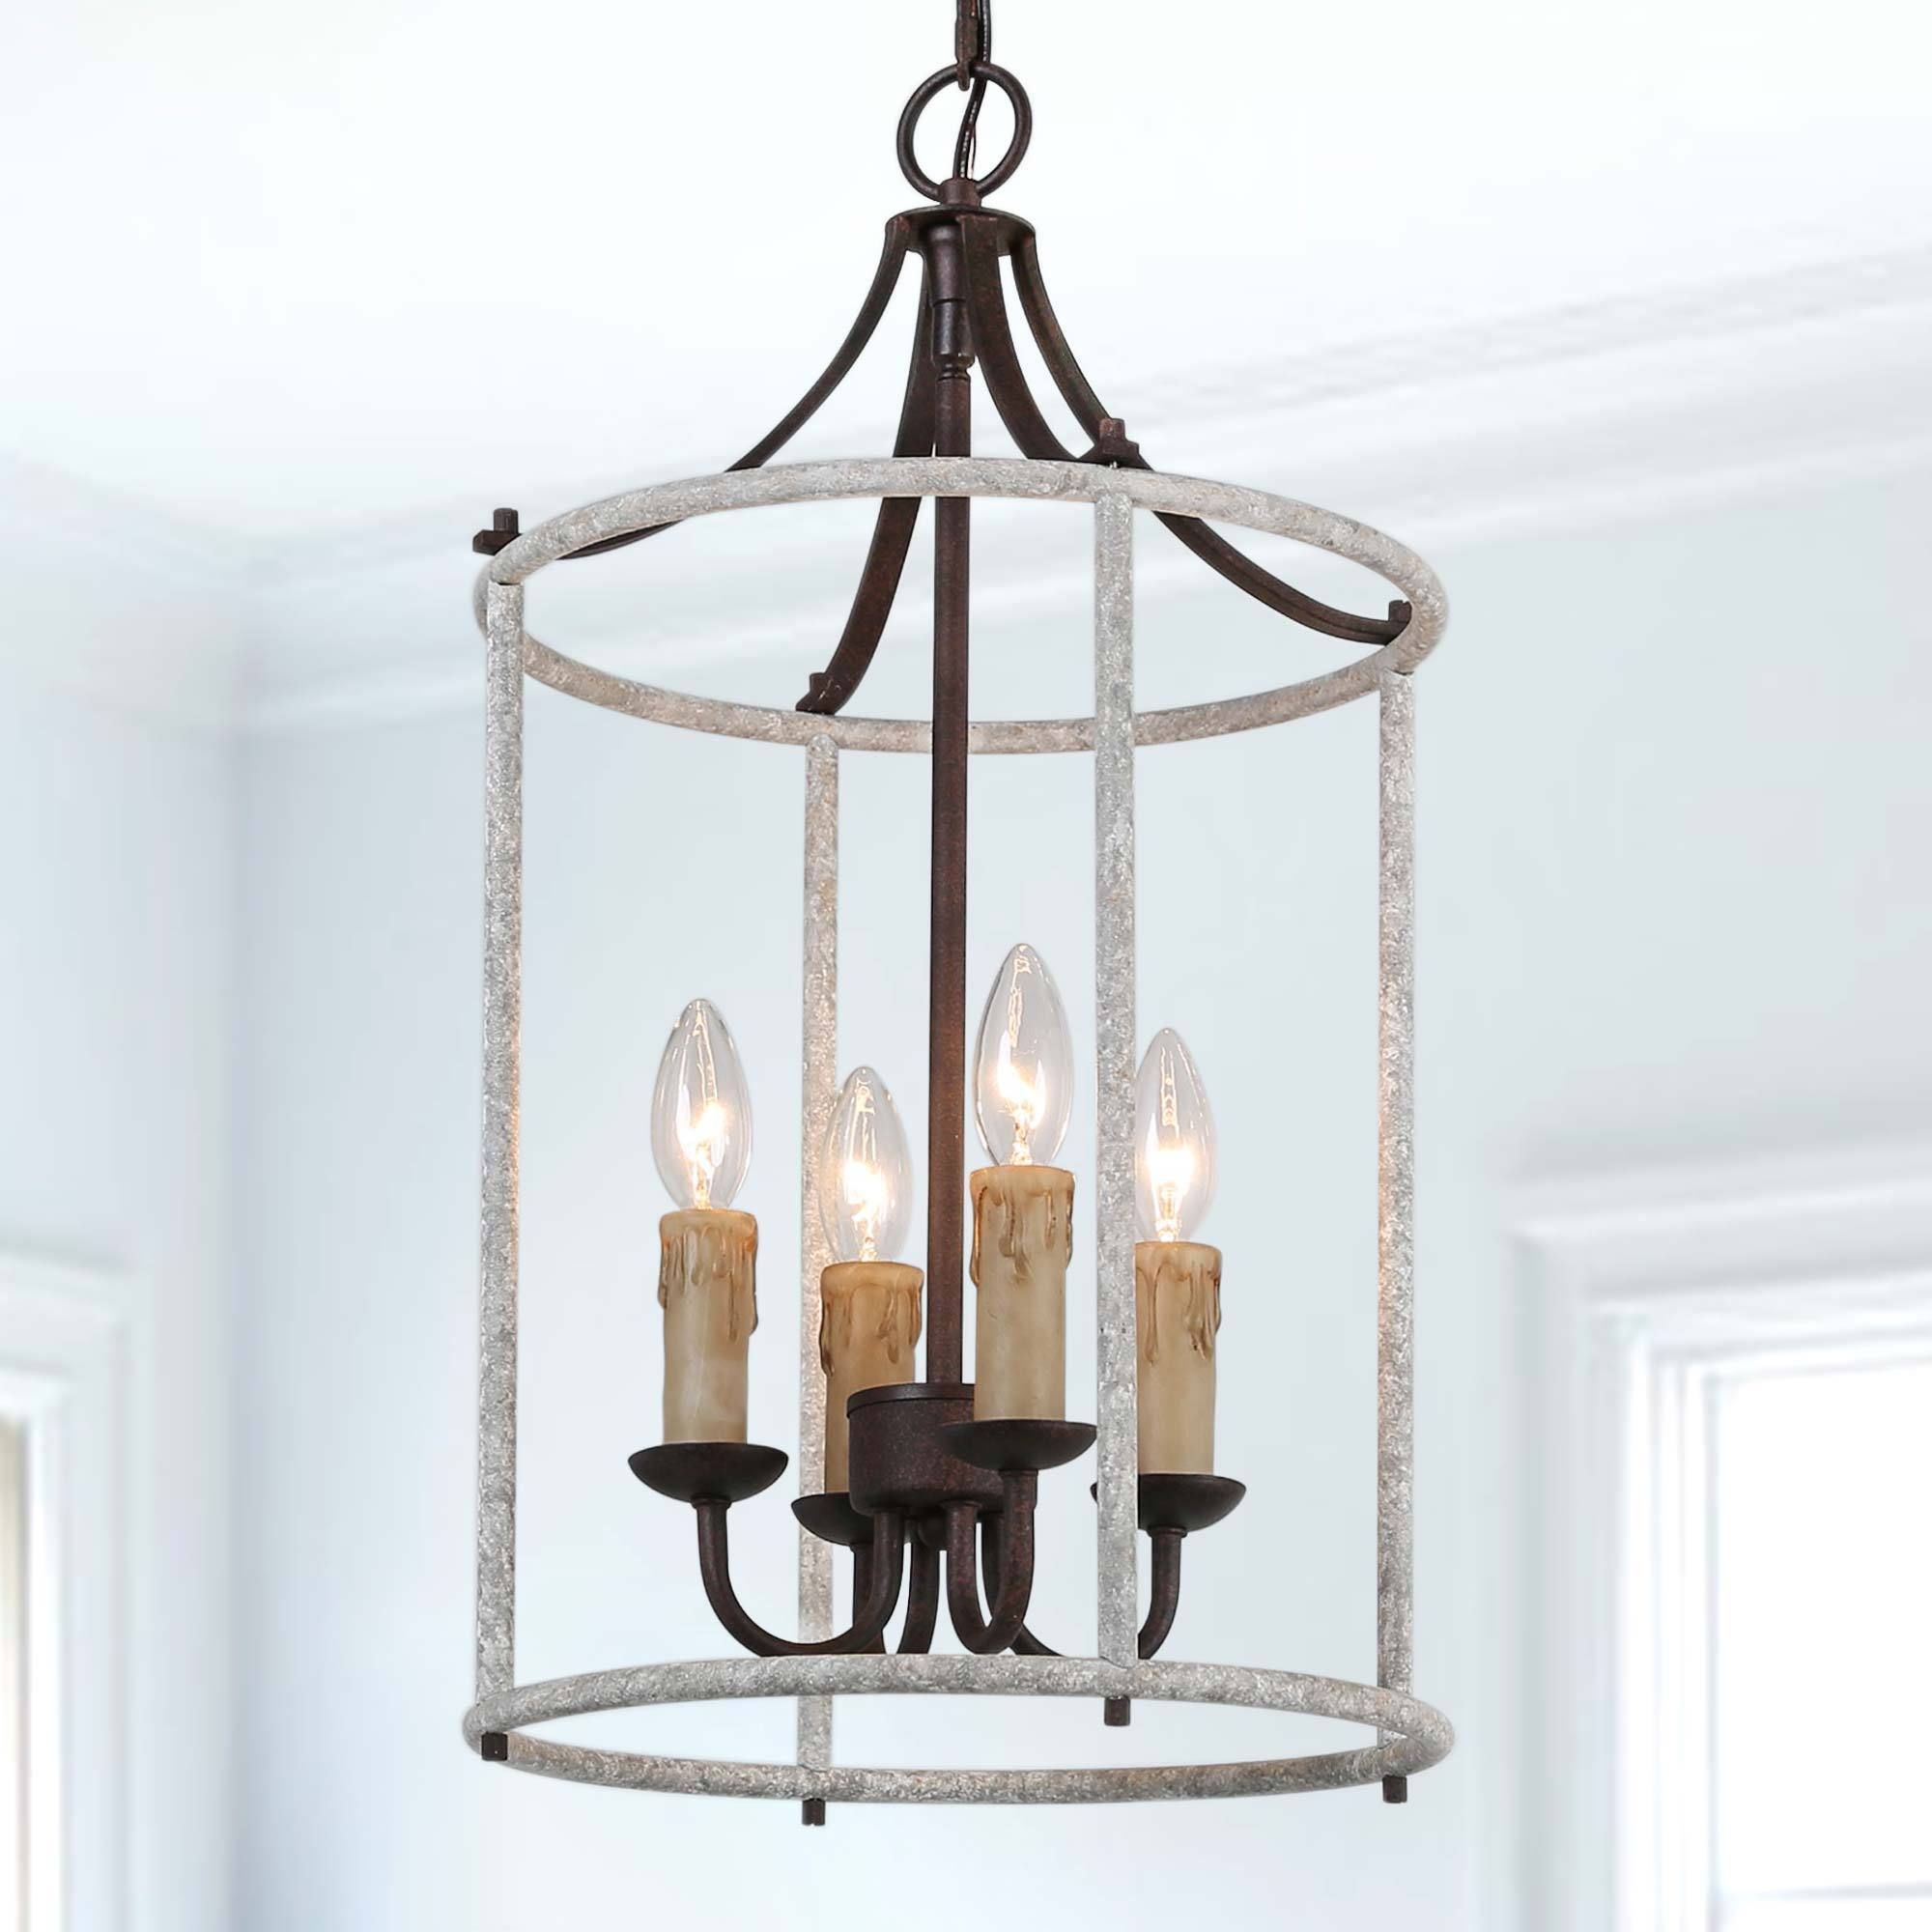 Deco Polished Nickel Lantern Chandeliers In Widely Used New World Decor Ribbon 4 Light Distressed Gray And Bronze Coastal Cage  Chandelier In The Chandeliers Department At Lowes (View 9 of 15)